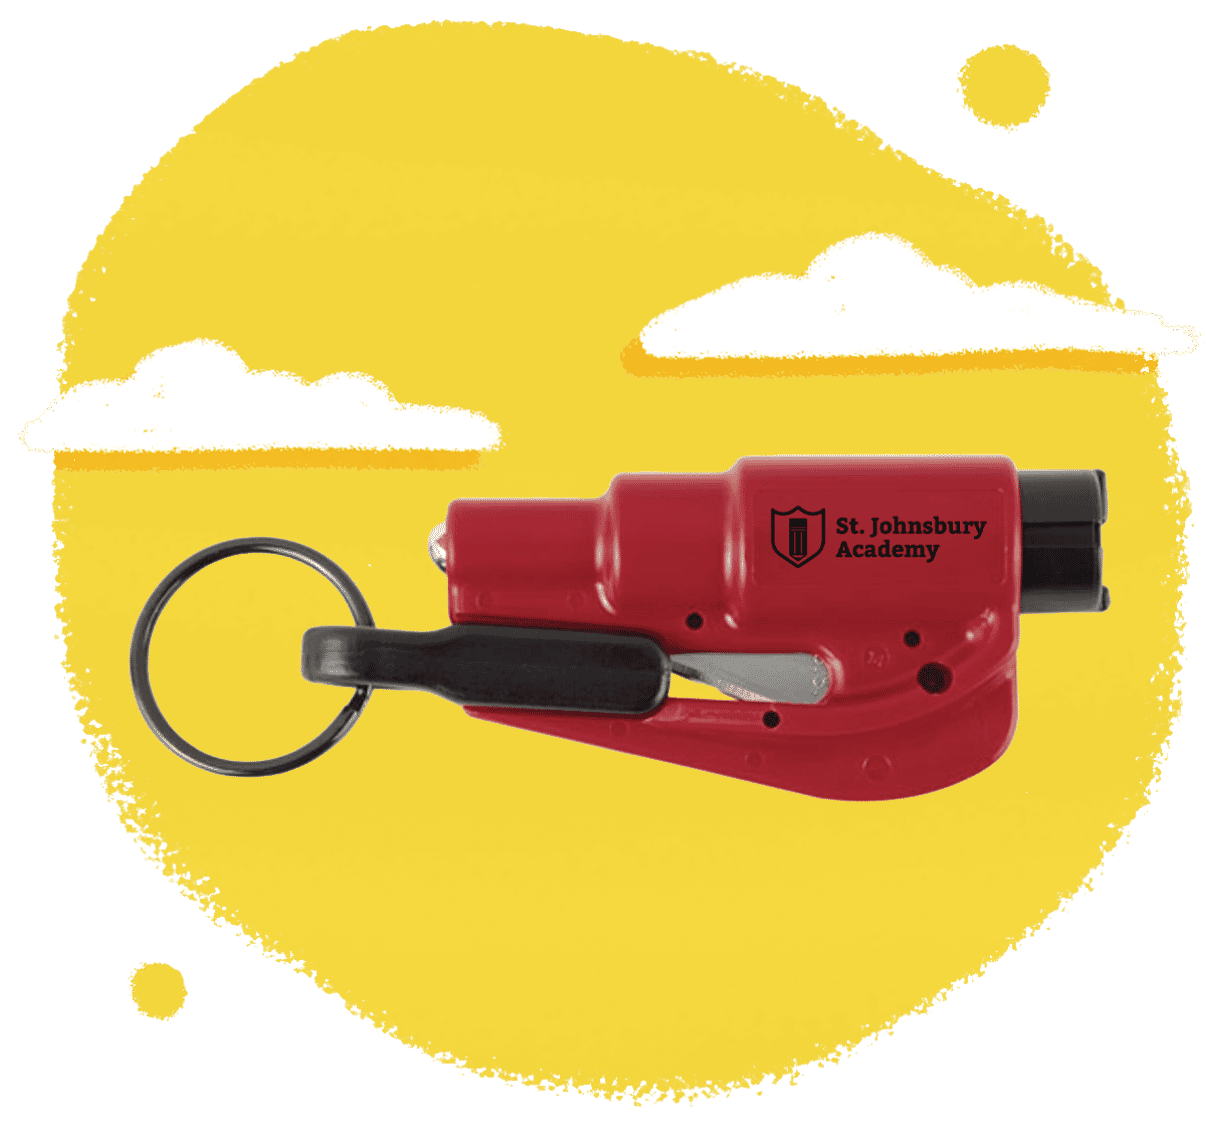 13. Resqme® 2-in-1 Auto Emergency Safety Tool